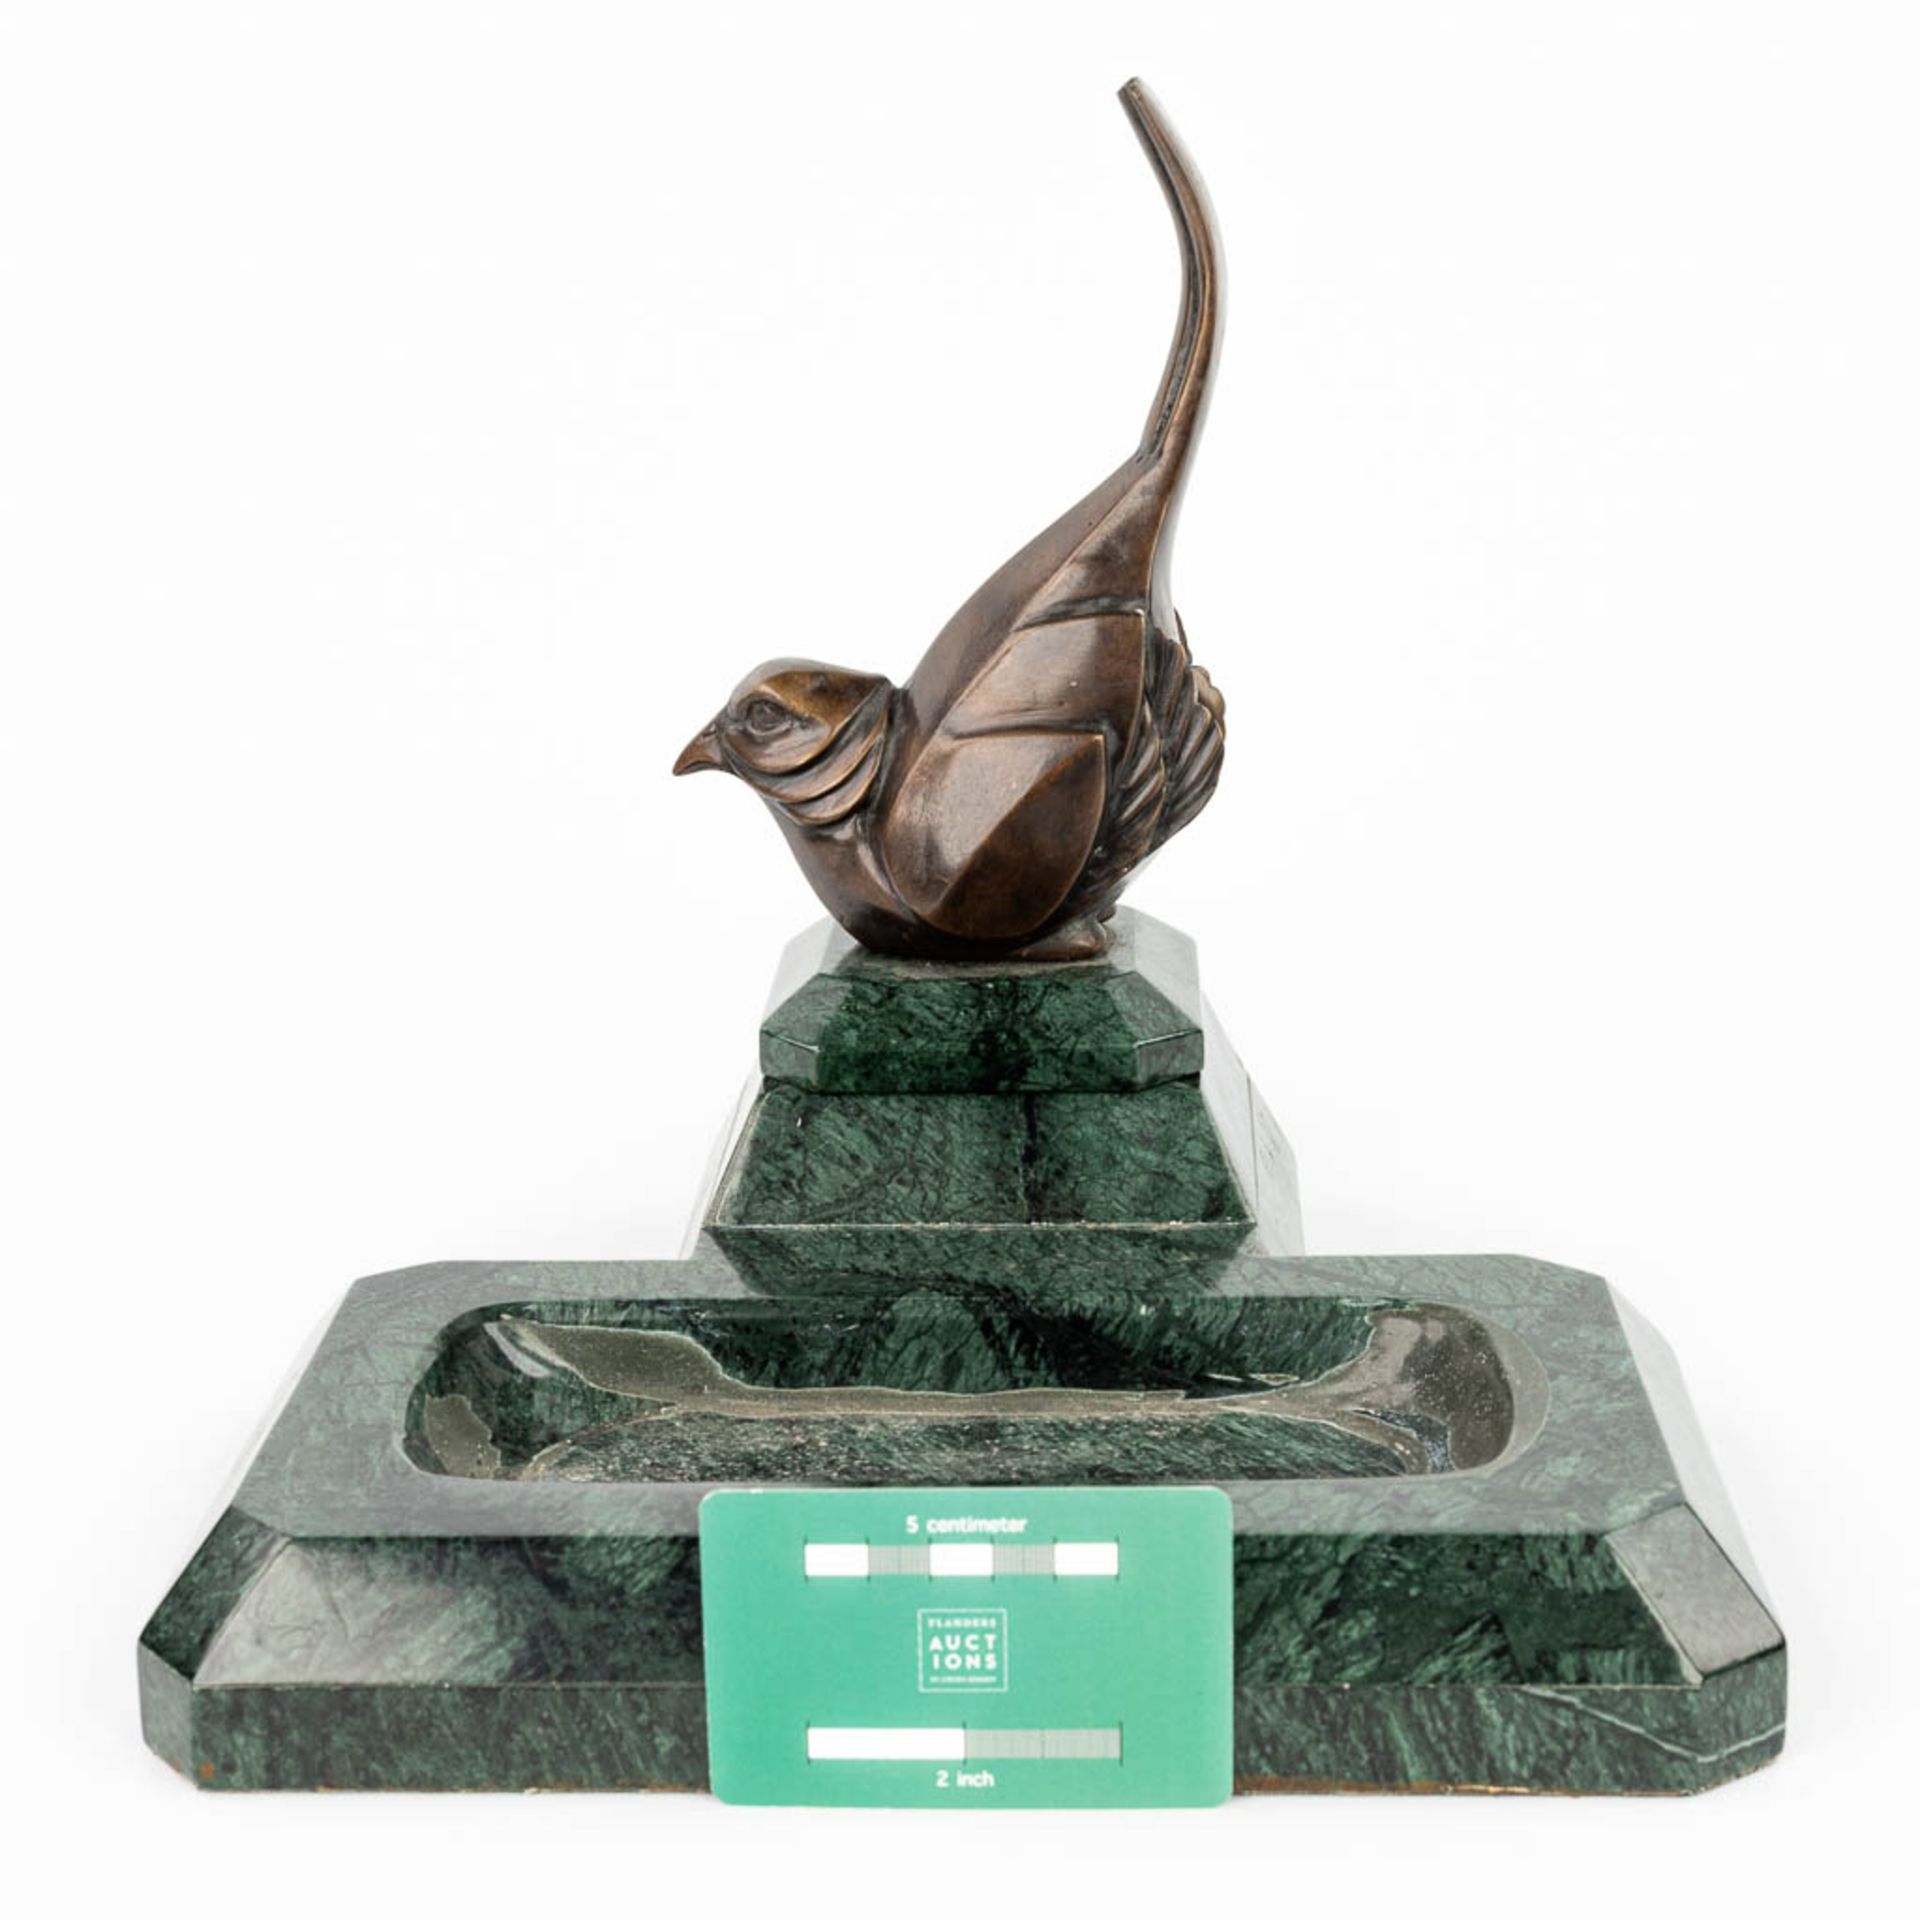 A 'Vide Poche' made of marble with a bird made of bronze in art deco style. - Bild 3 aus 10